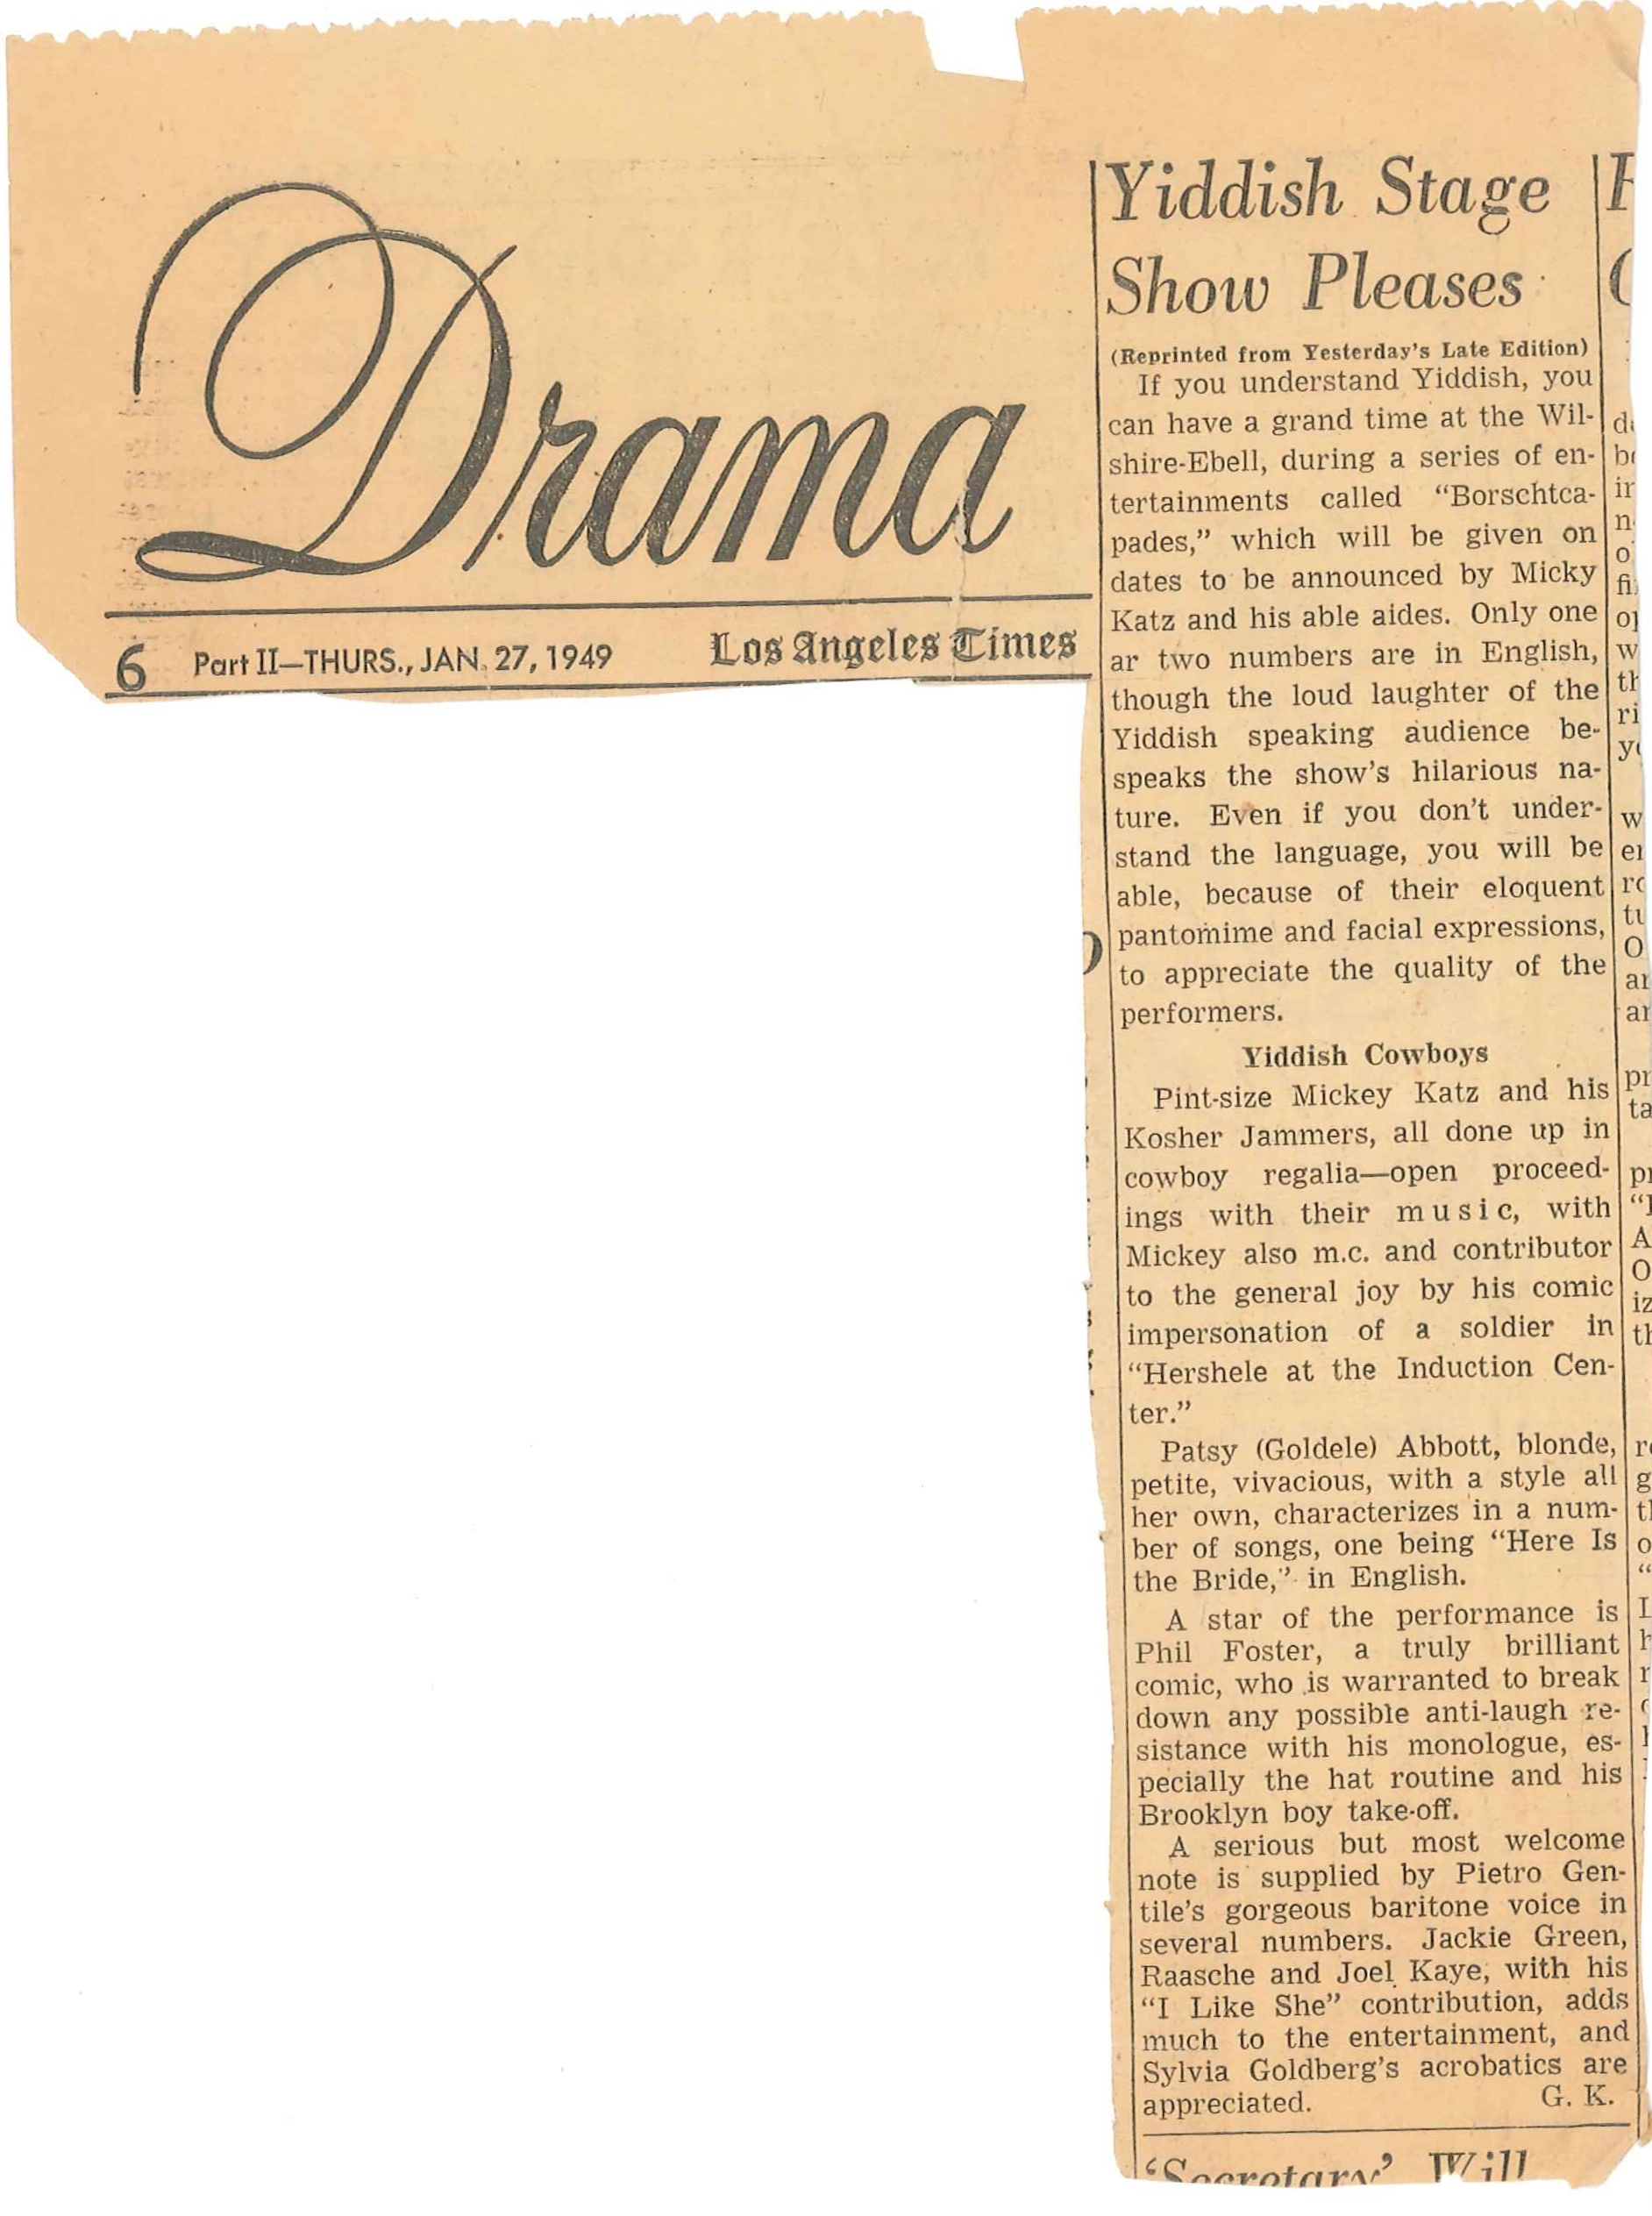 0007NC_Los Angeles Times Borscht Capades review_1_27_49_Clippings